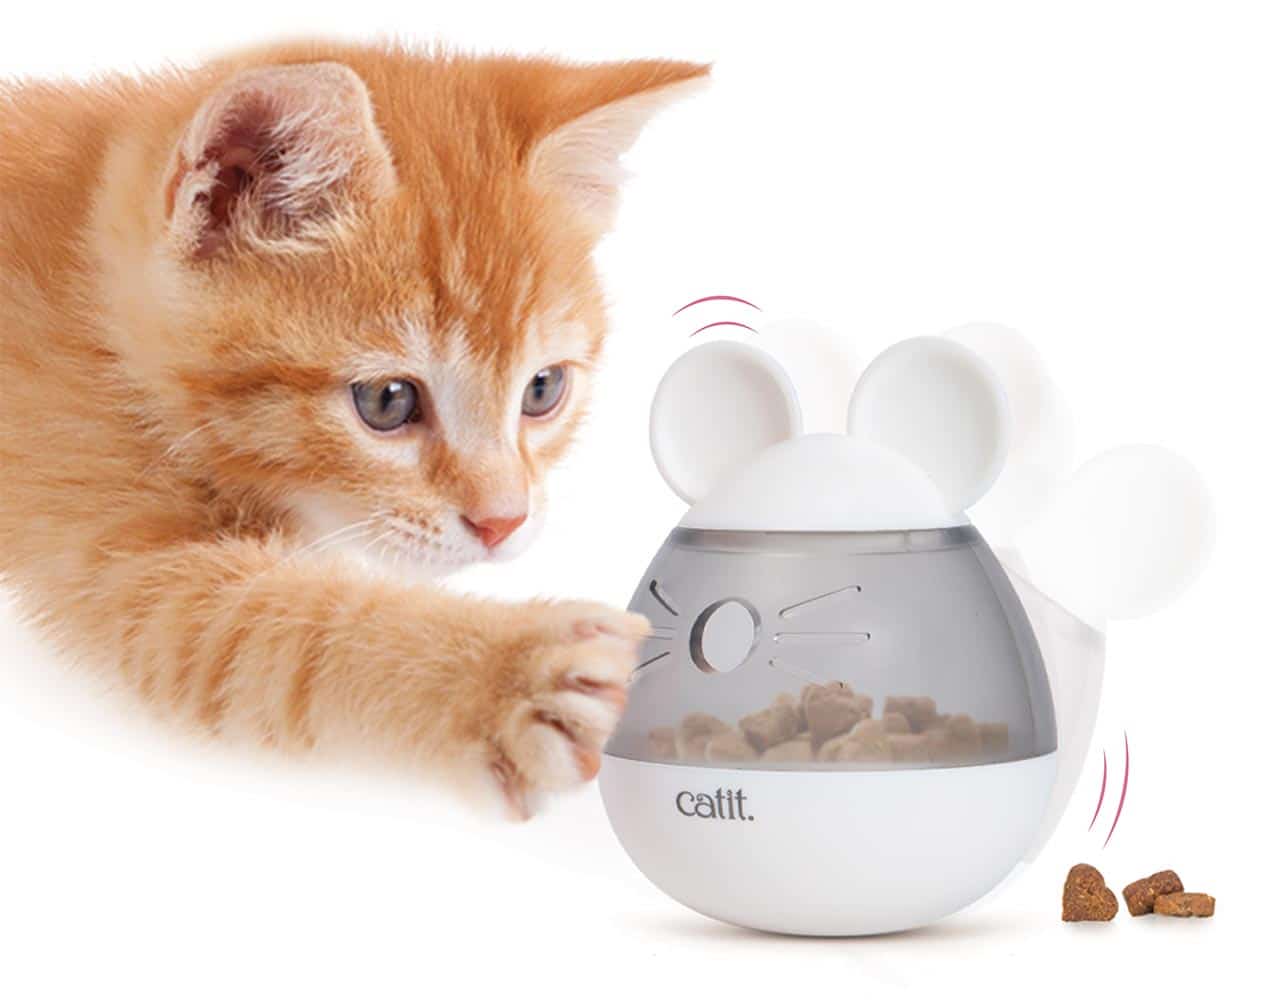 Mouse dispenser-Self-righting treat toy